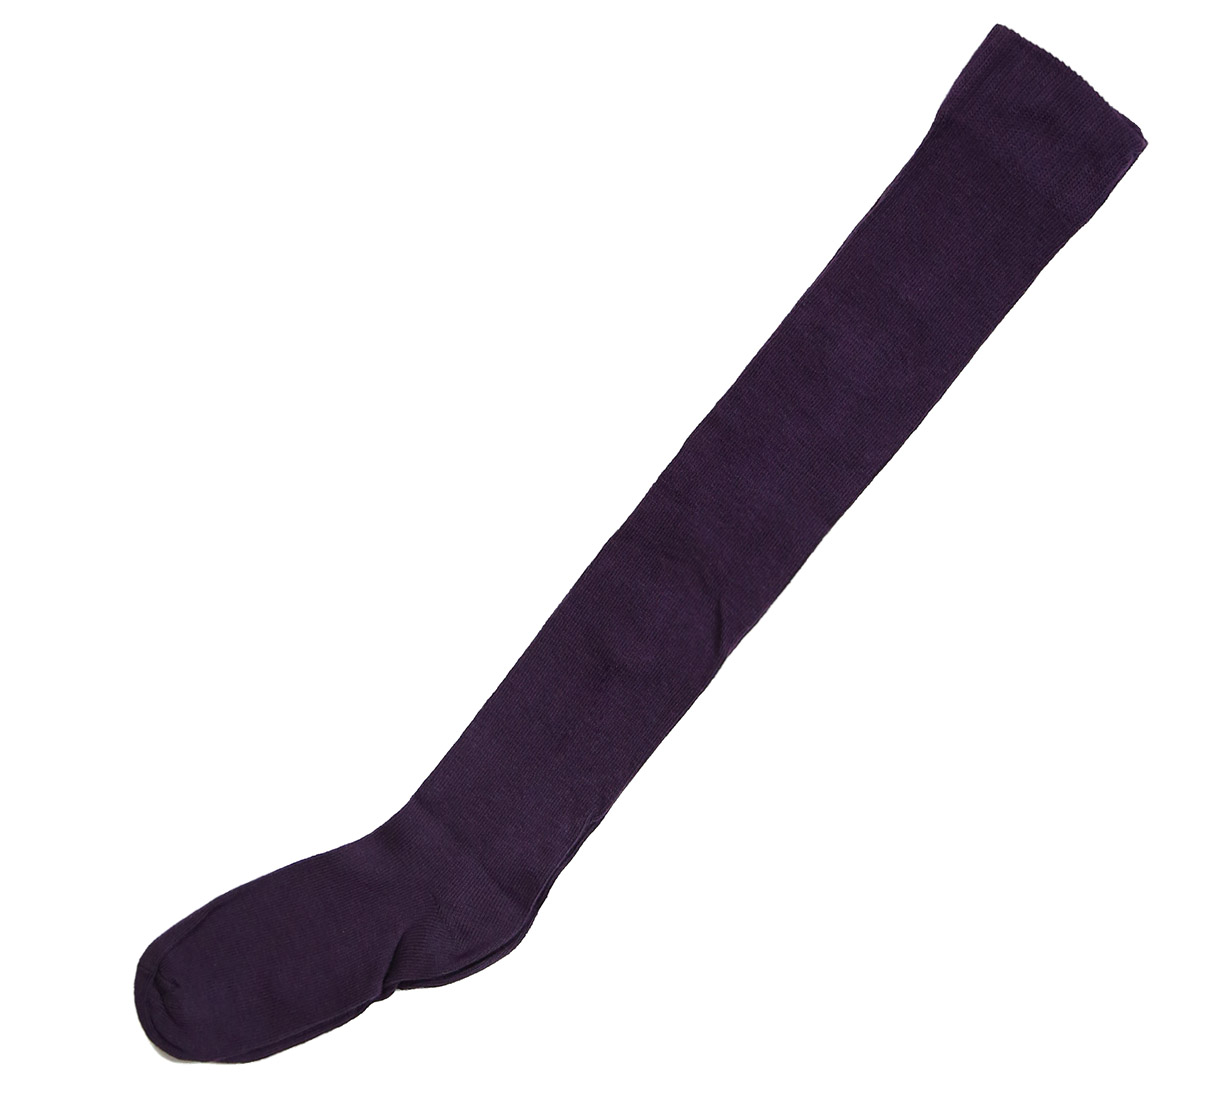 Solid Purple Over the Knee socks | Thigh high Socks | Made in USA Socks at Between the Sheets